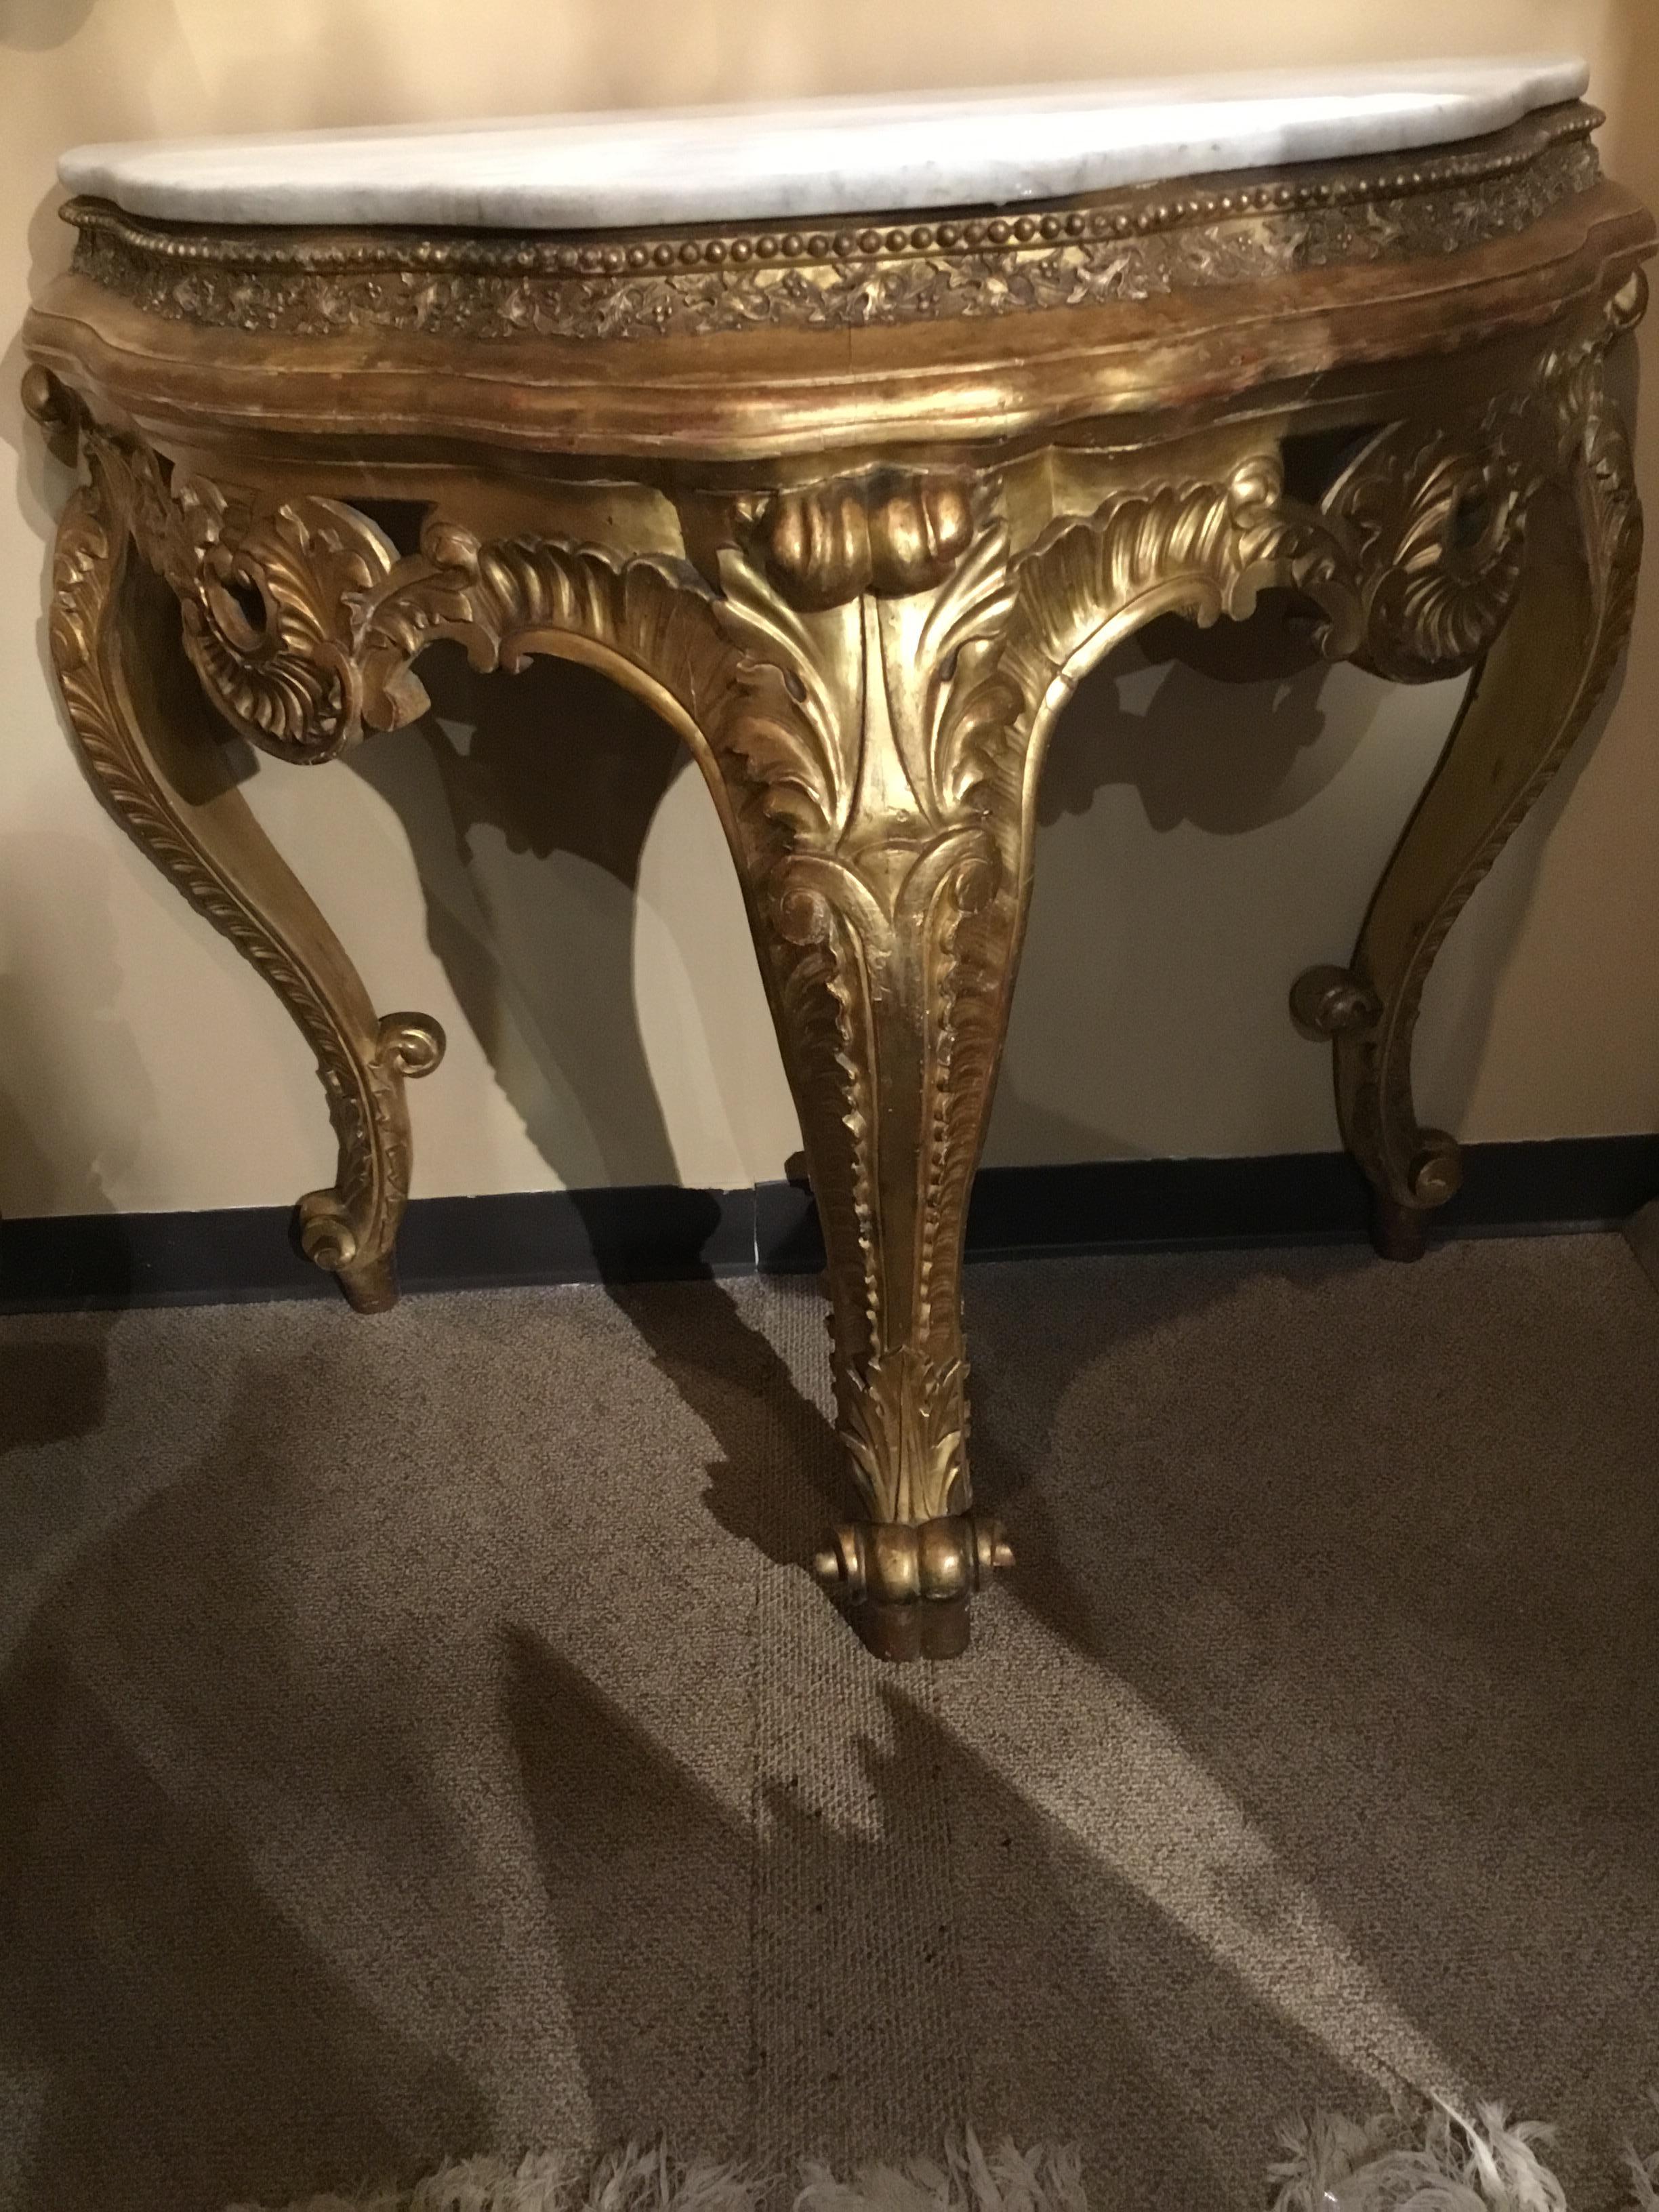 Giltwood neoclassical console table with bold curved leg with a whorl
Foot. A foliate carving surrounds the apron and a swirl design embellishes
The elegant curved legs. It is of demilune form.